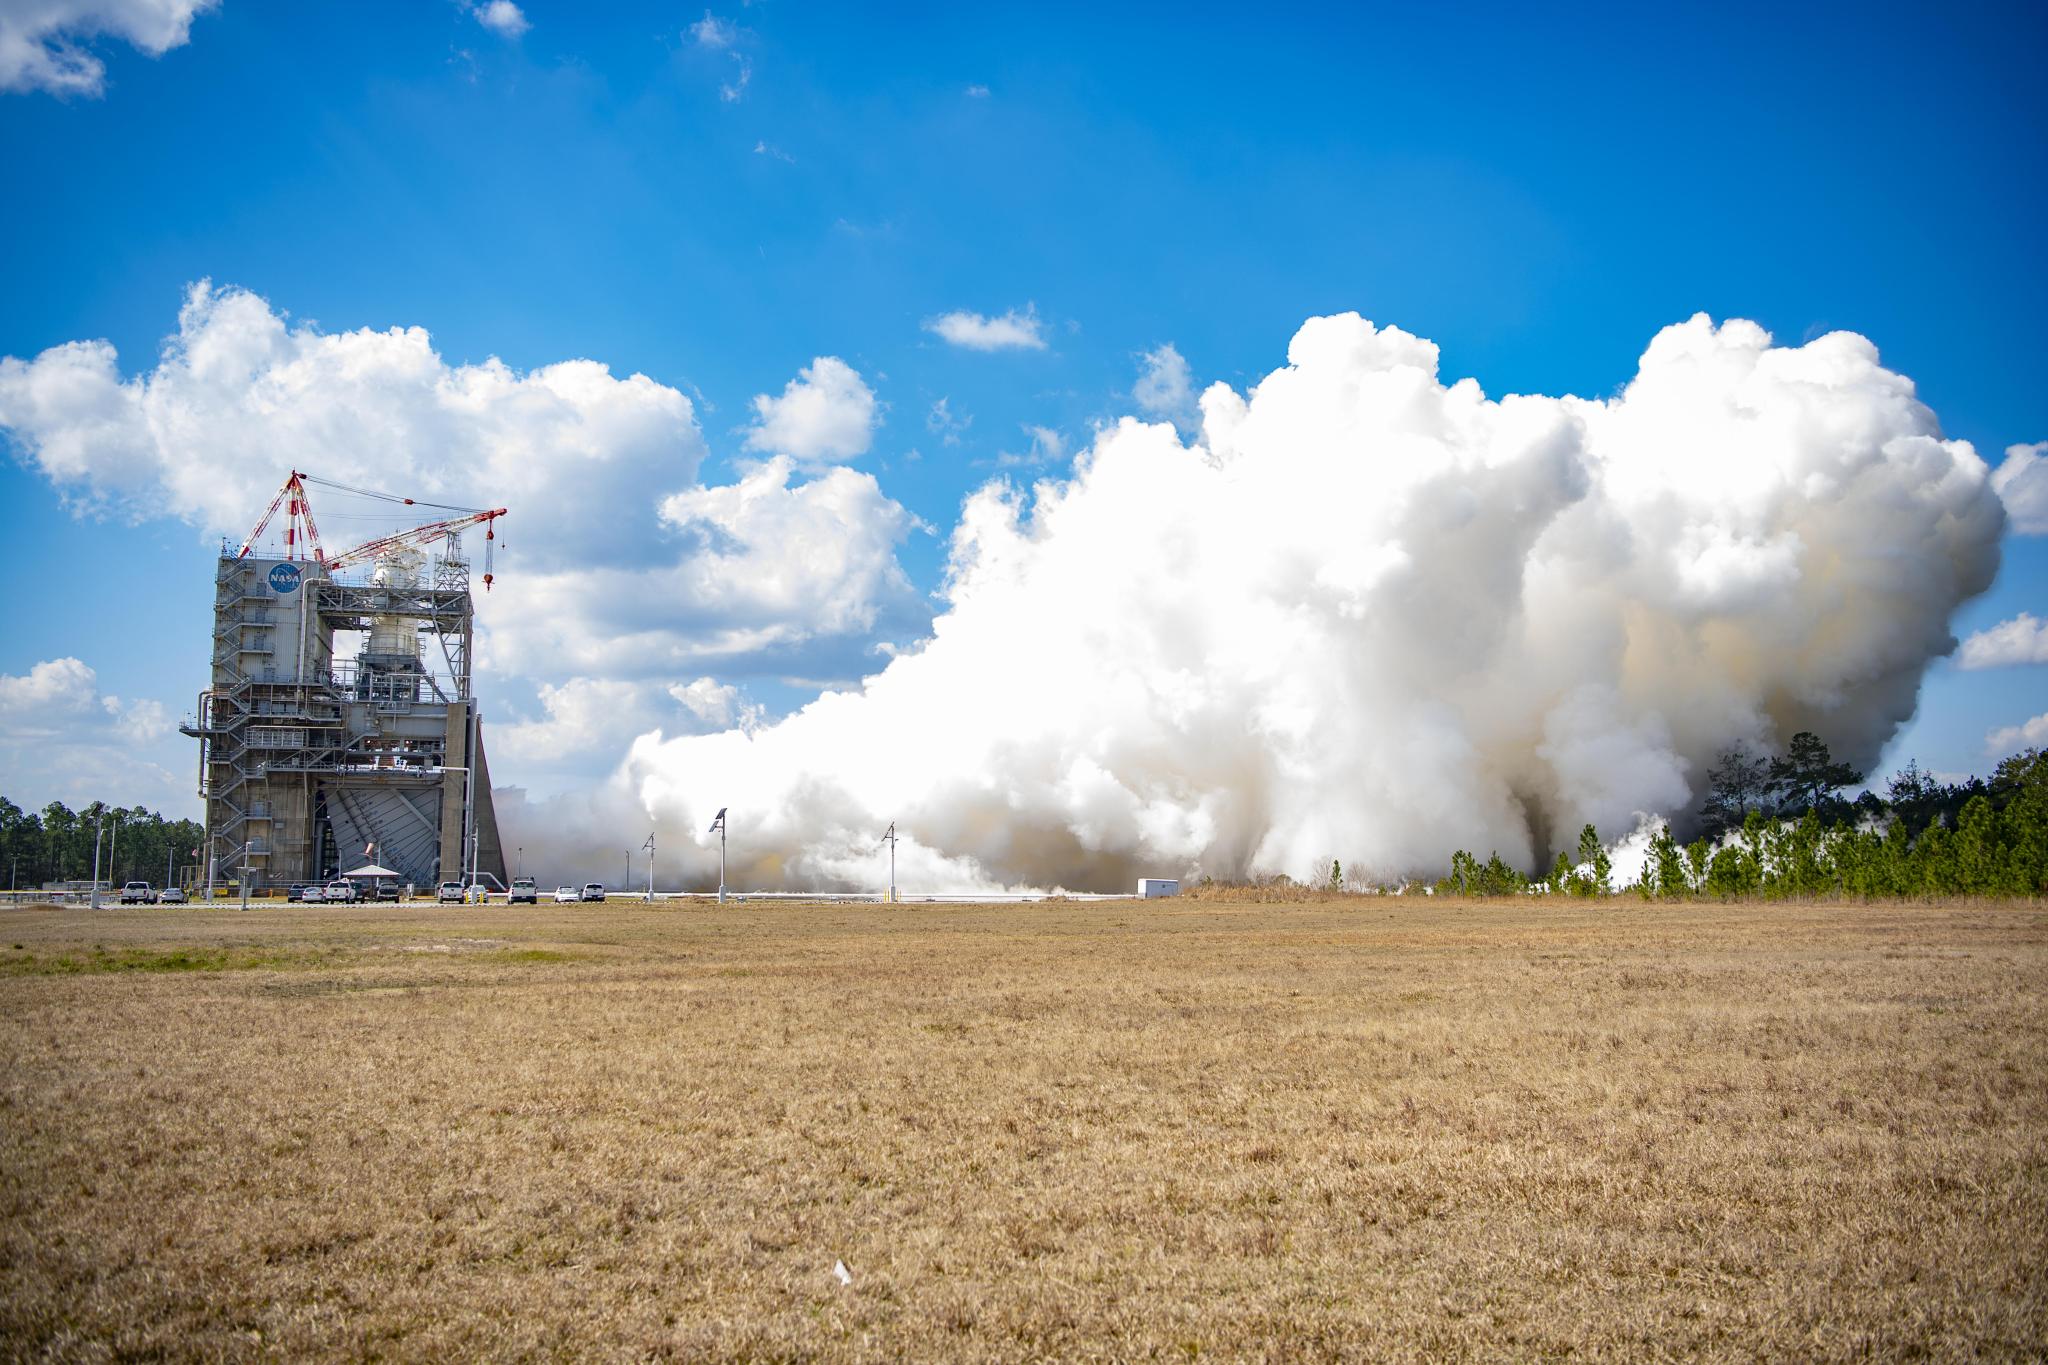 vapor clouds erupt from a RS-25 hot fire; view is across a grassy field